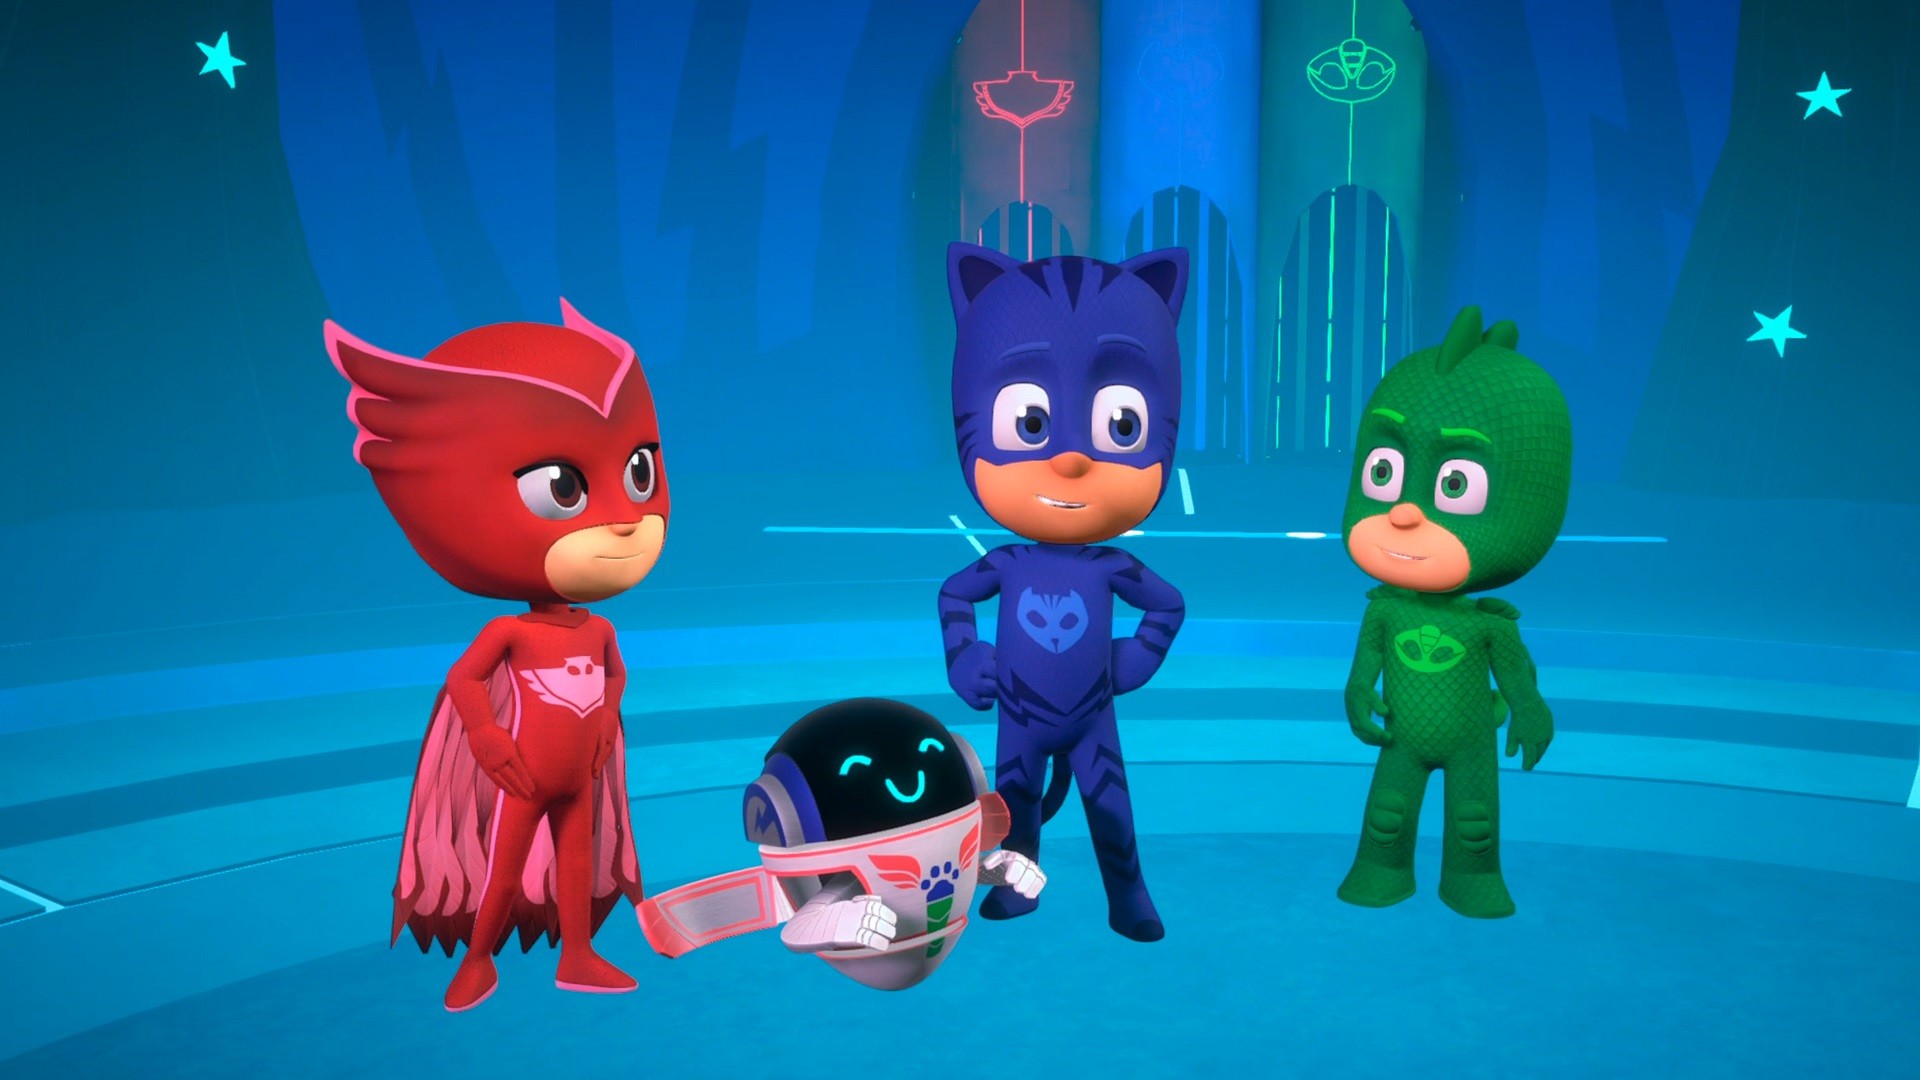 PJ MASKS: HEROES OF THE NIGHT Free Download